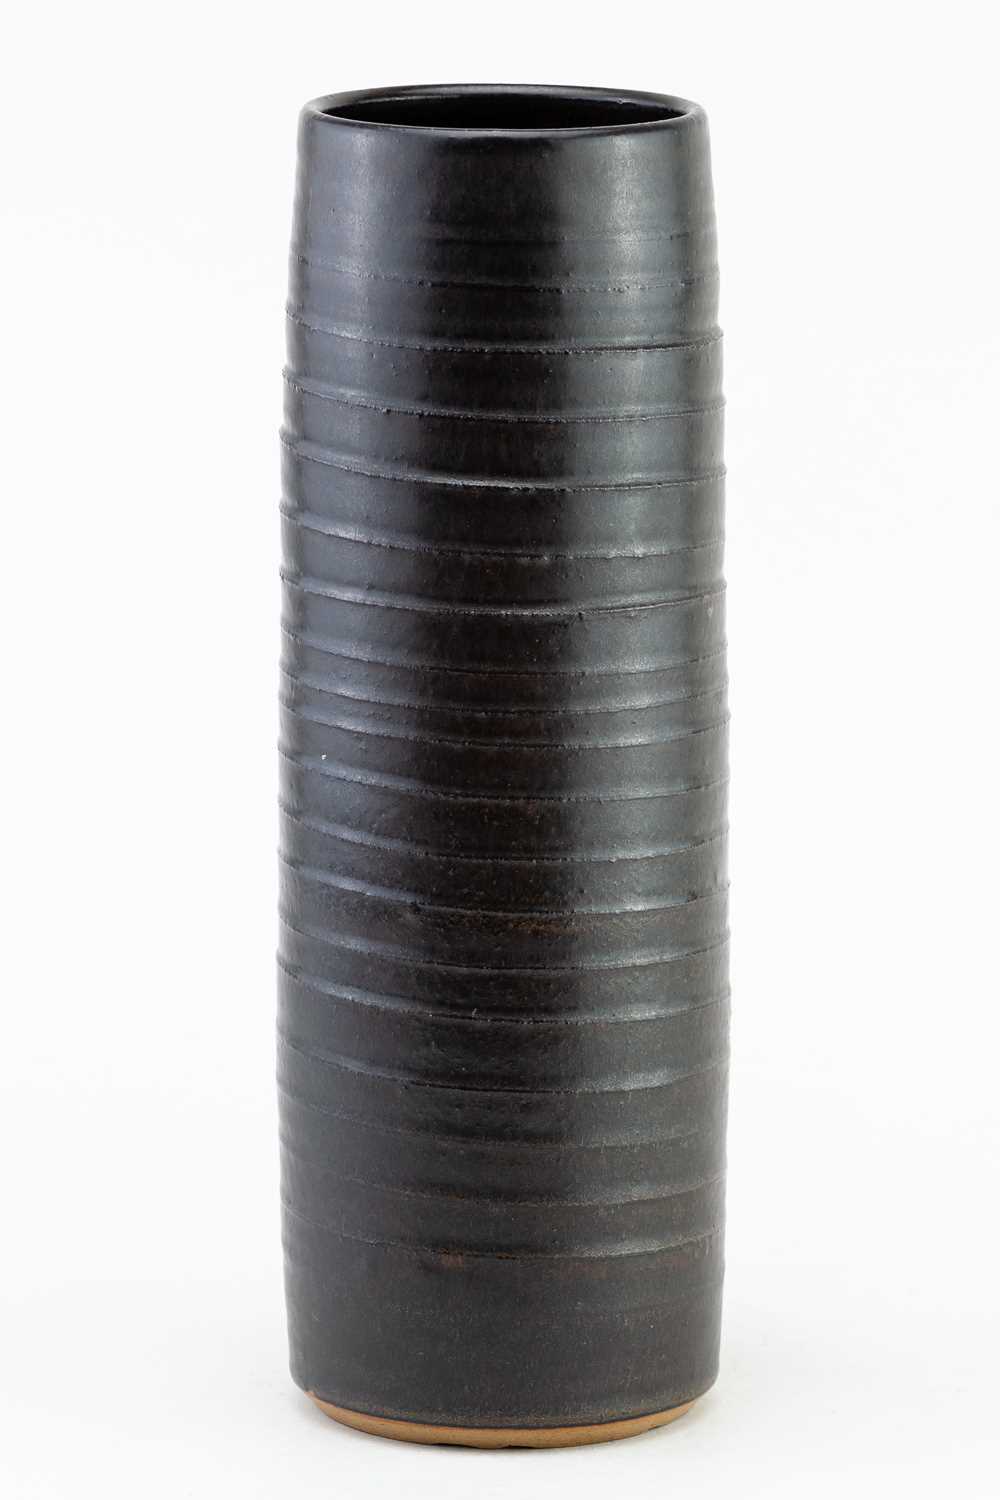 † JOHN SOLLY (1928-2004); a tall cylindrical stoneware vase with pronounced ribbing covered in